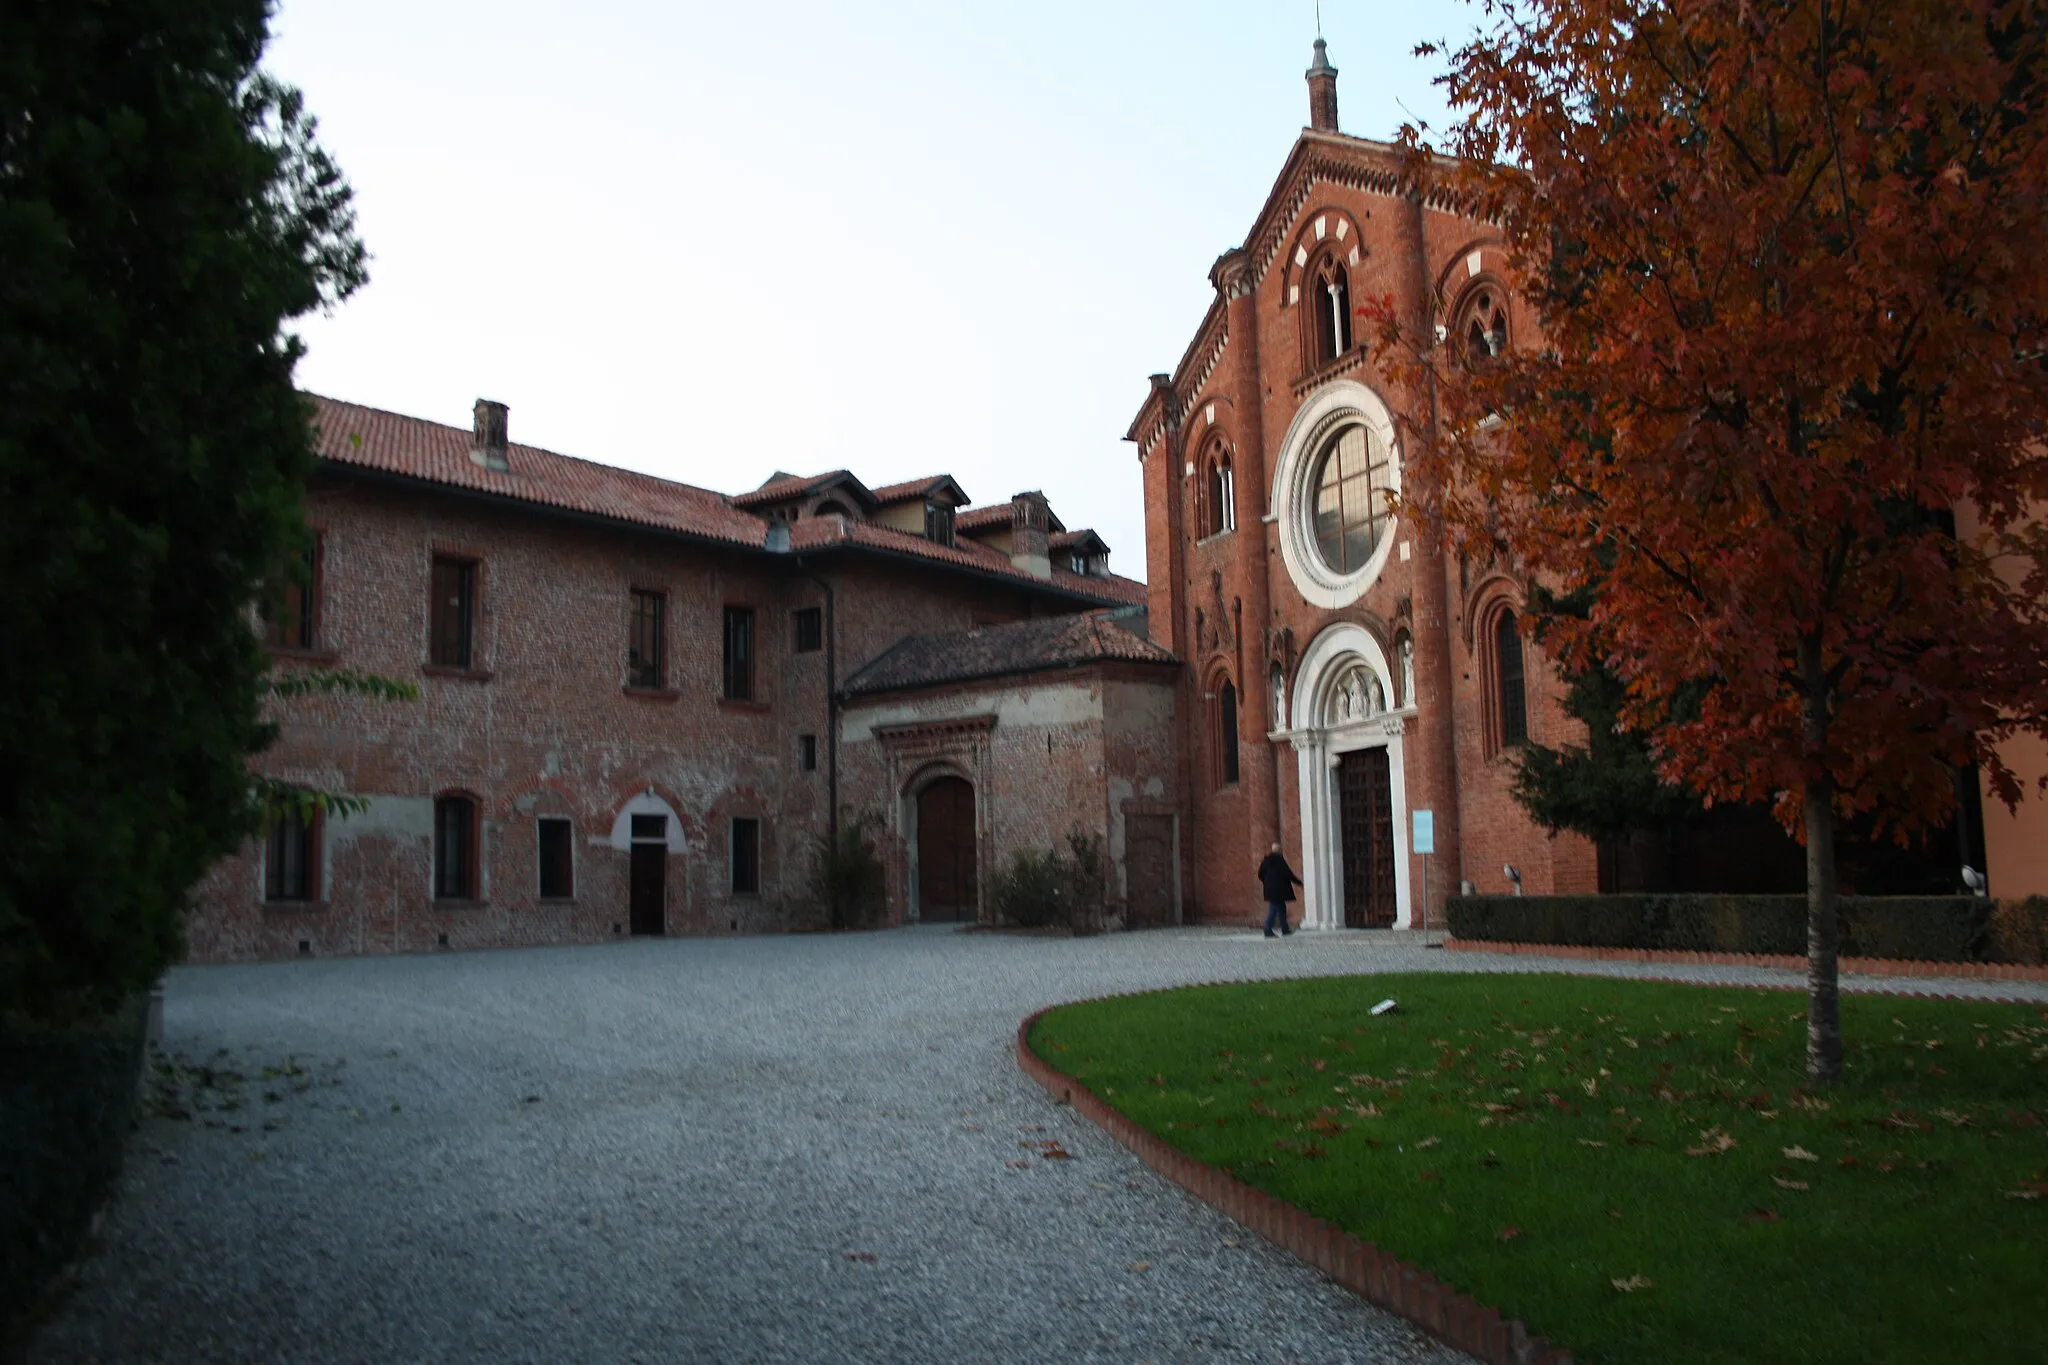 Photo showing: The Romansque-to-Gothic style facade of the former Abbey at Viboldone, (Milan, Italy). It was completed in 1348. Picture by Giovanni Dall'Orto, October 31st 2009.